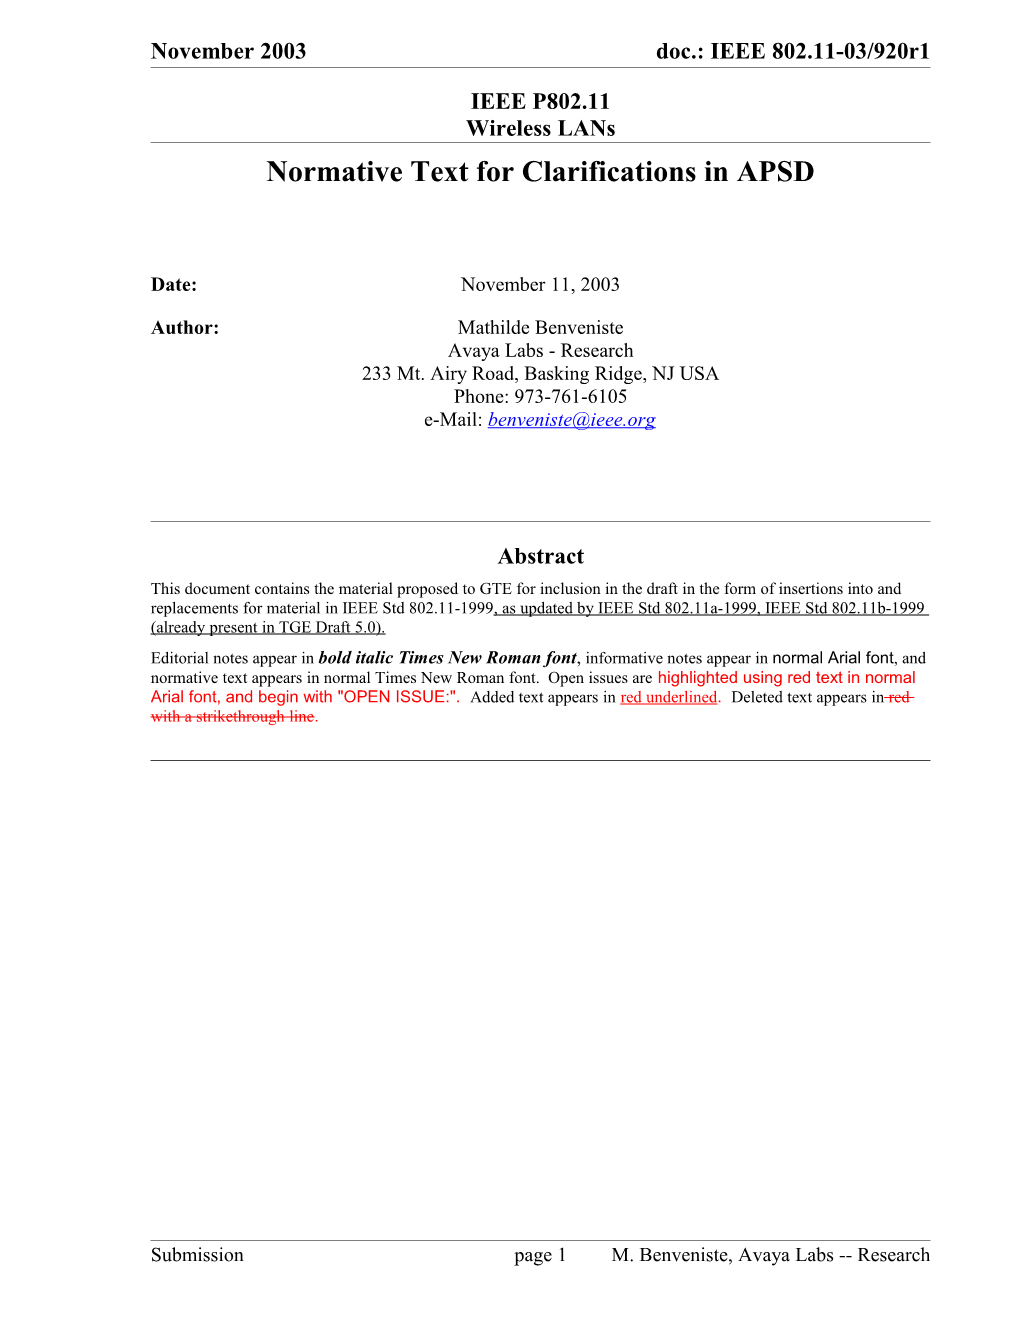 Normative Text for Clarifications in APSD